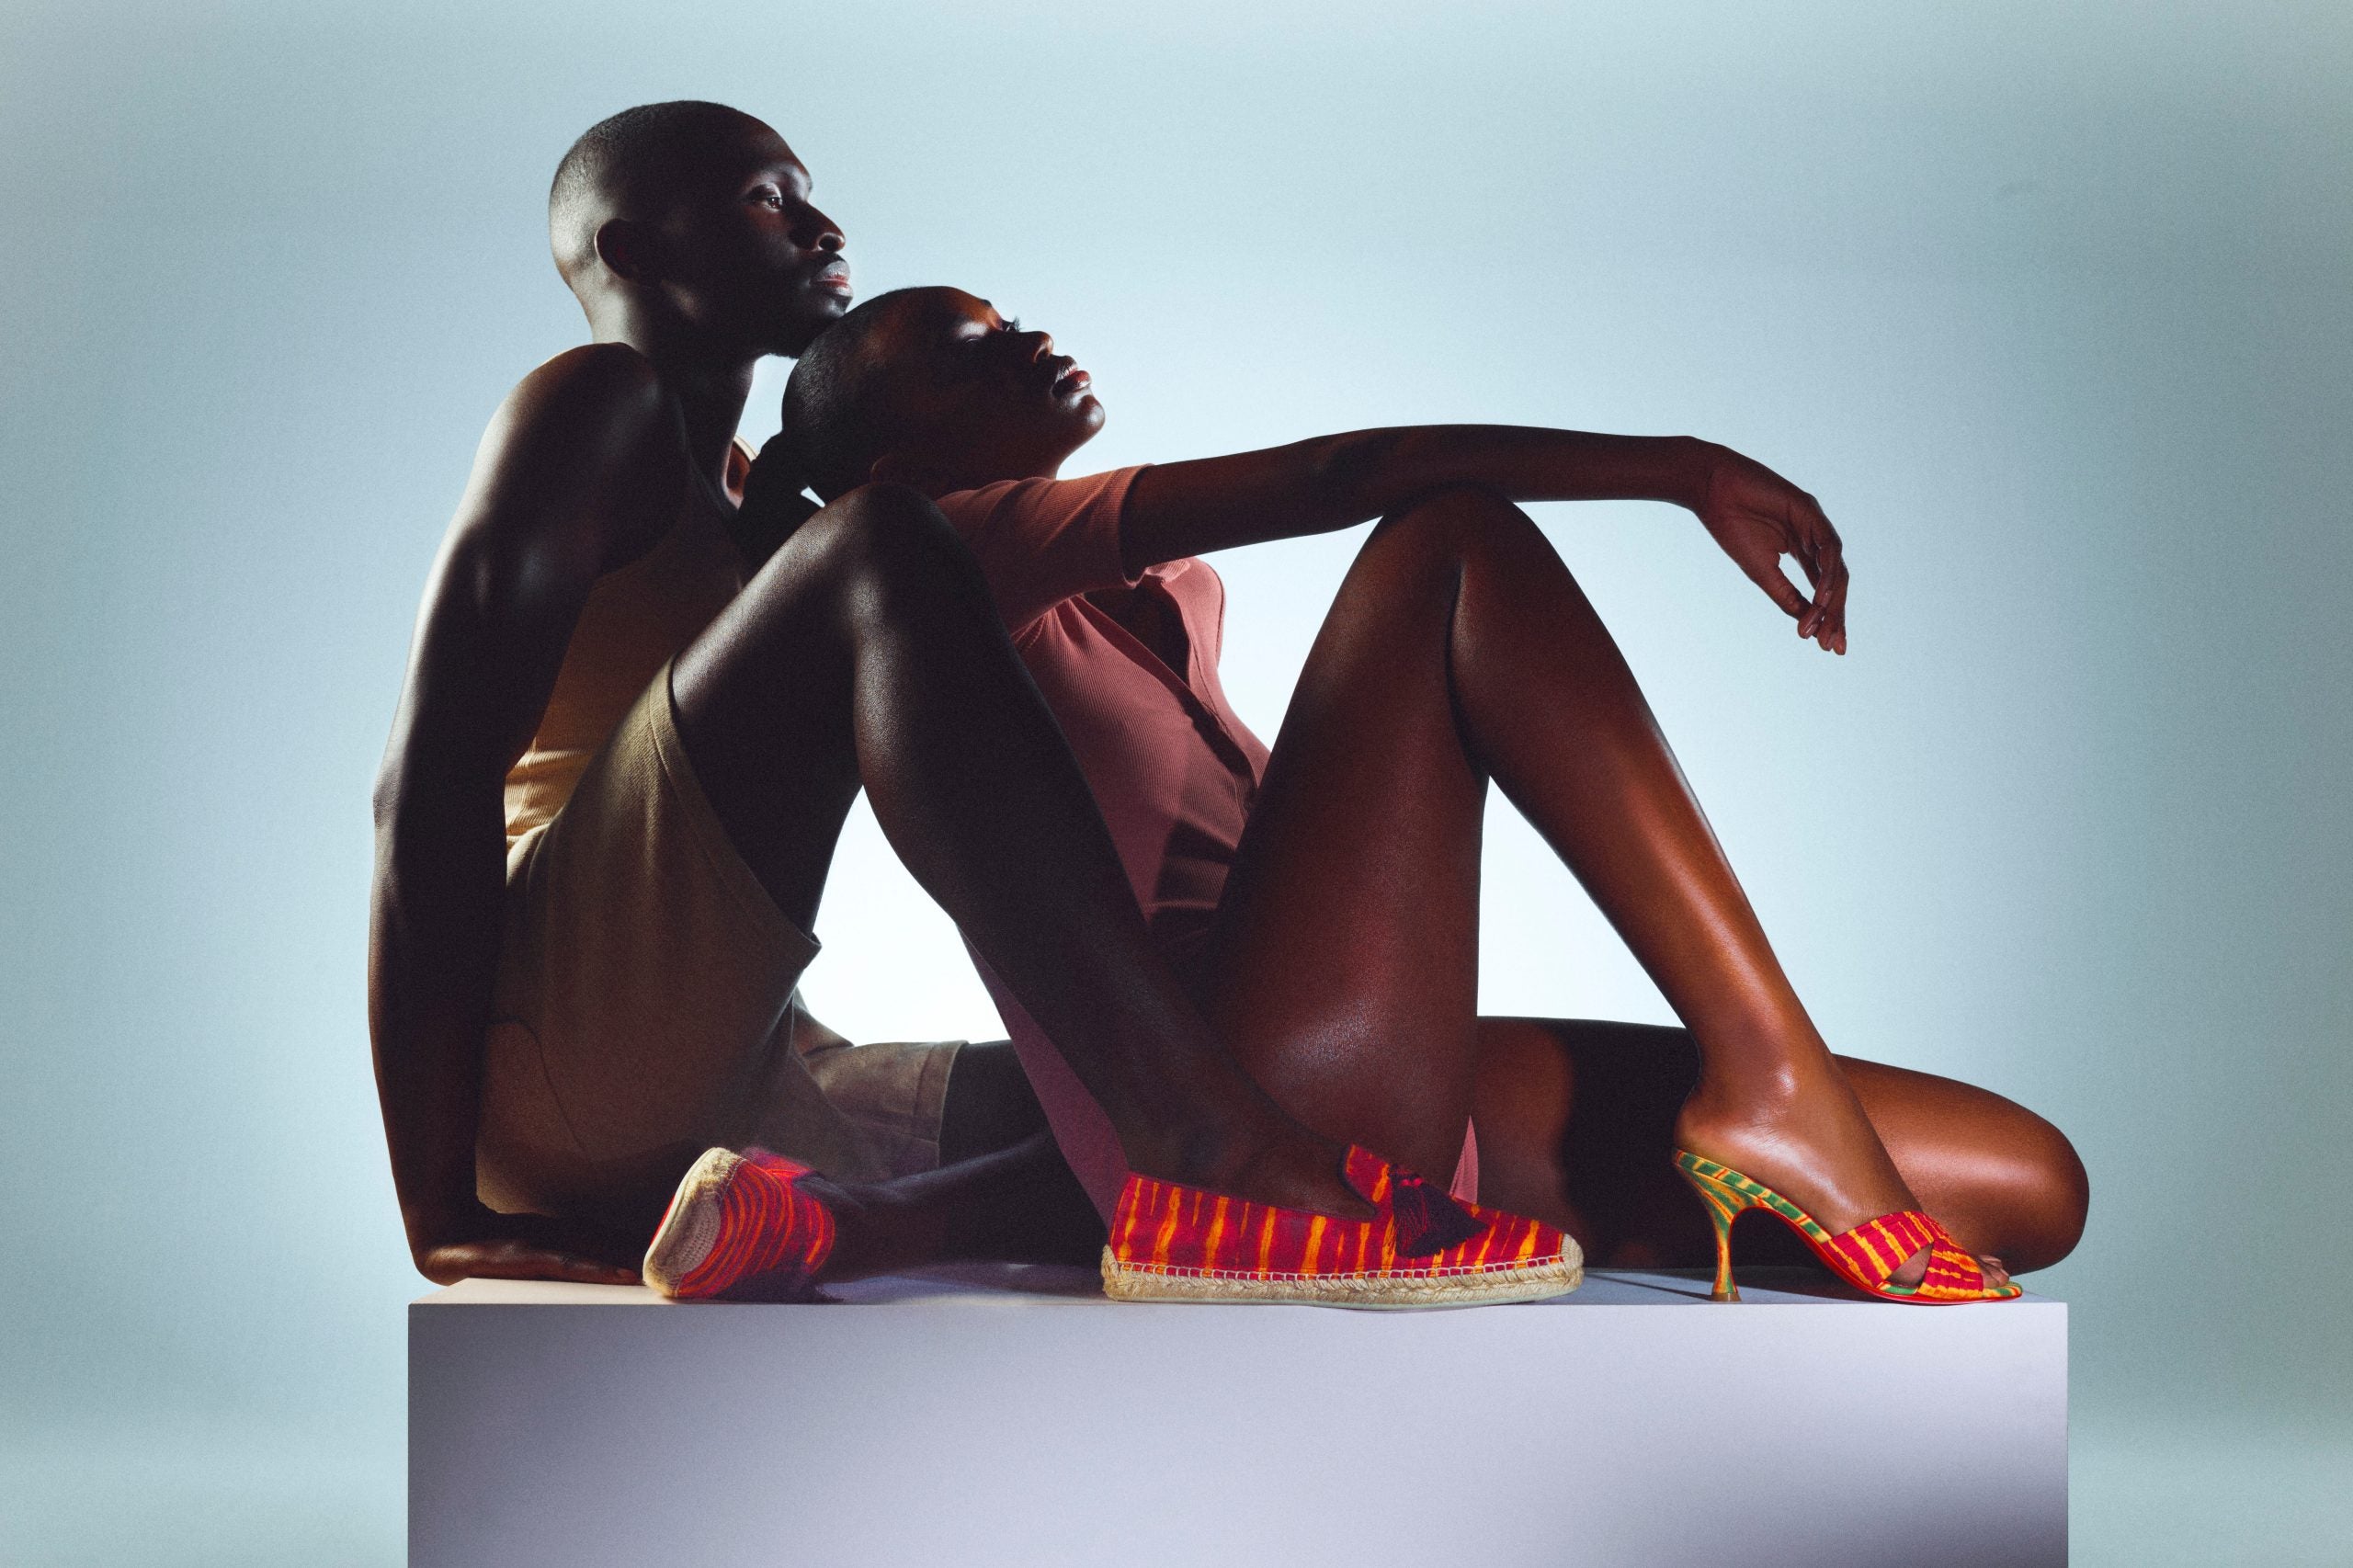 Christian Louboutin, Sabrina Elba, and Idris Elba Reinvented Red-Bottoms  for a Cause